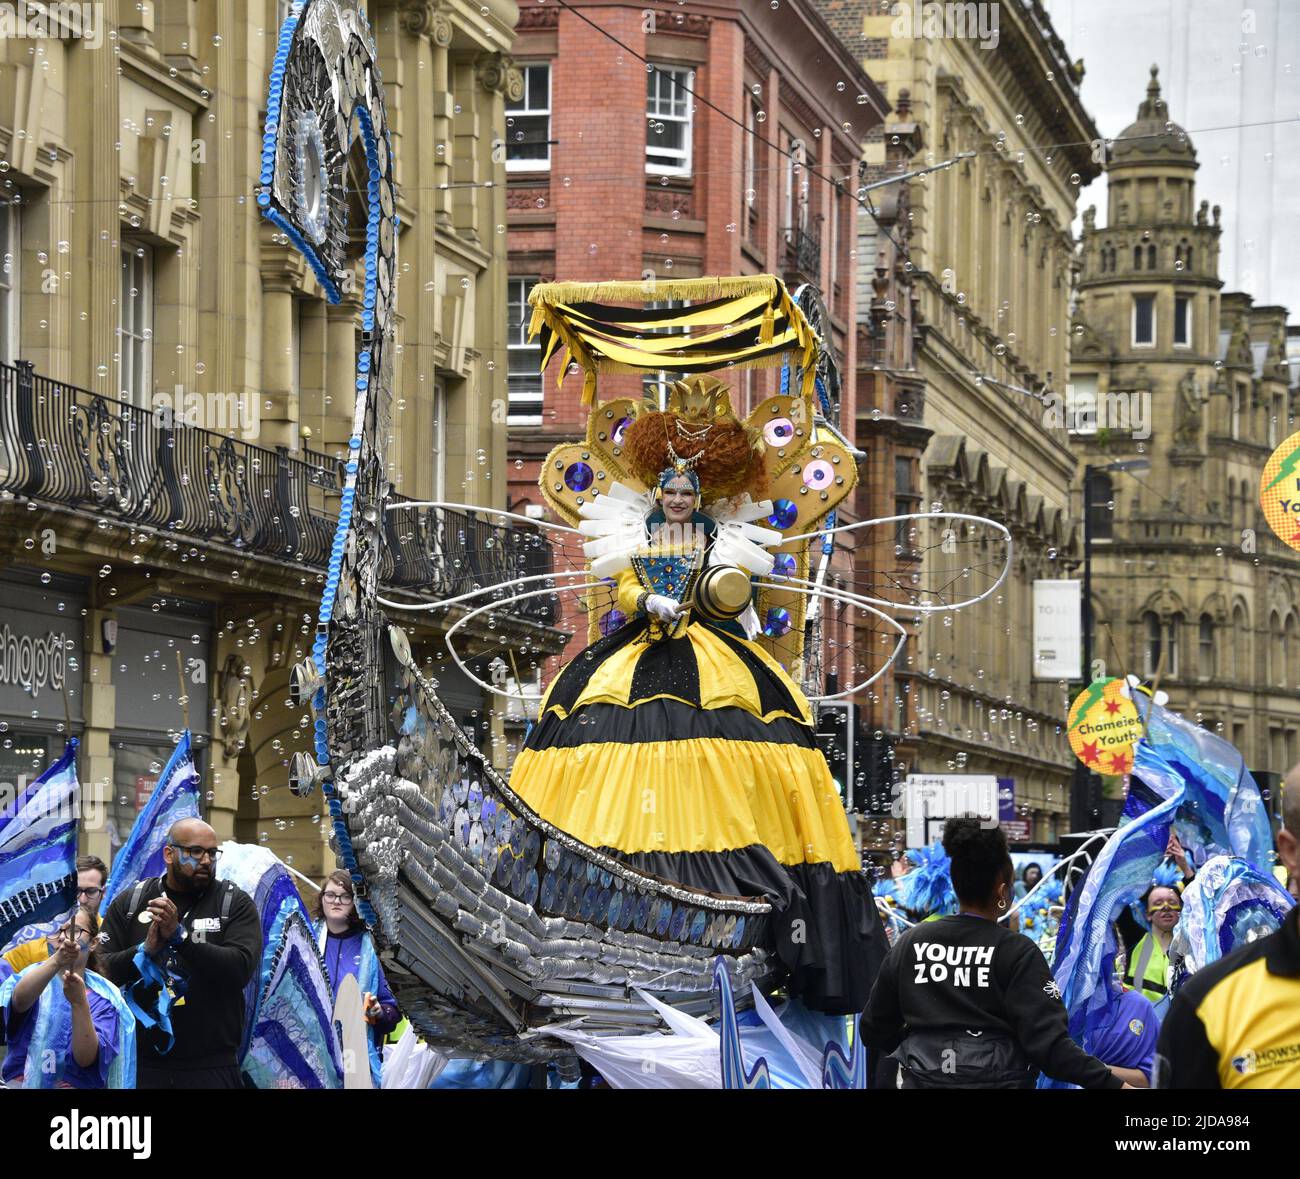 Manchester, UK, 19th June, 2022. The Queen Bee float. Performers and artists take part in the Manchester Day Parade, Manchester, England, United Kingdom. Organisers say: "Over 1,500 performers and artists from local communities bring Manchester city centre to life in a fantastic display of colour, sound and movement. An audience of more than 60,000 are wowed by the incredible day of amazing structures, vibrant costumes and pulsating music and dance". Credit: Terry Waller/Alamy Live News Stock Photo